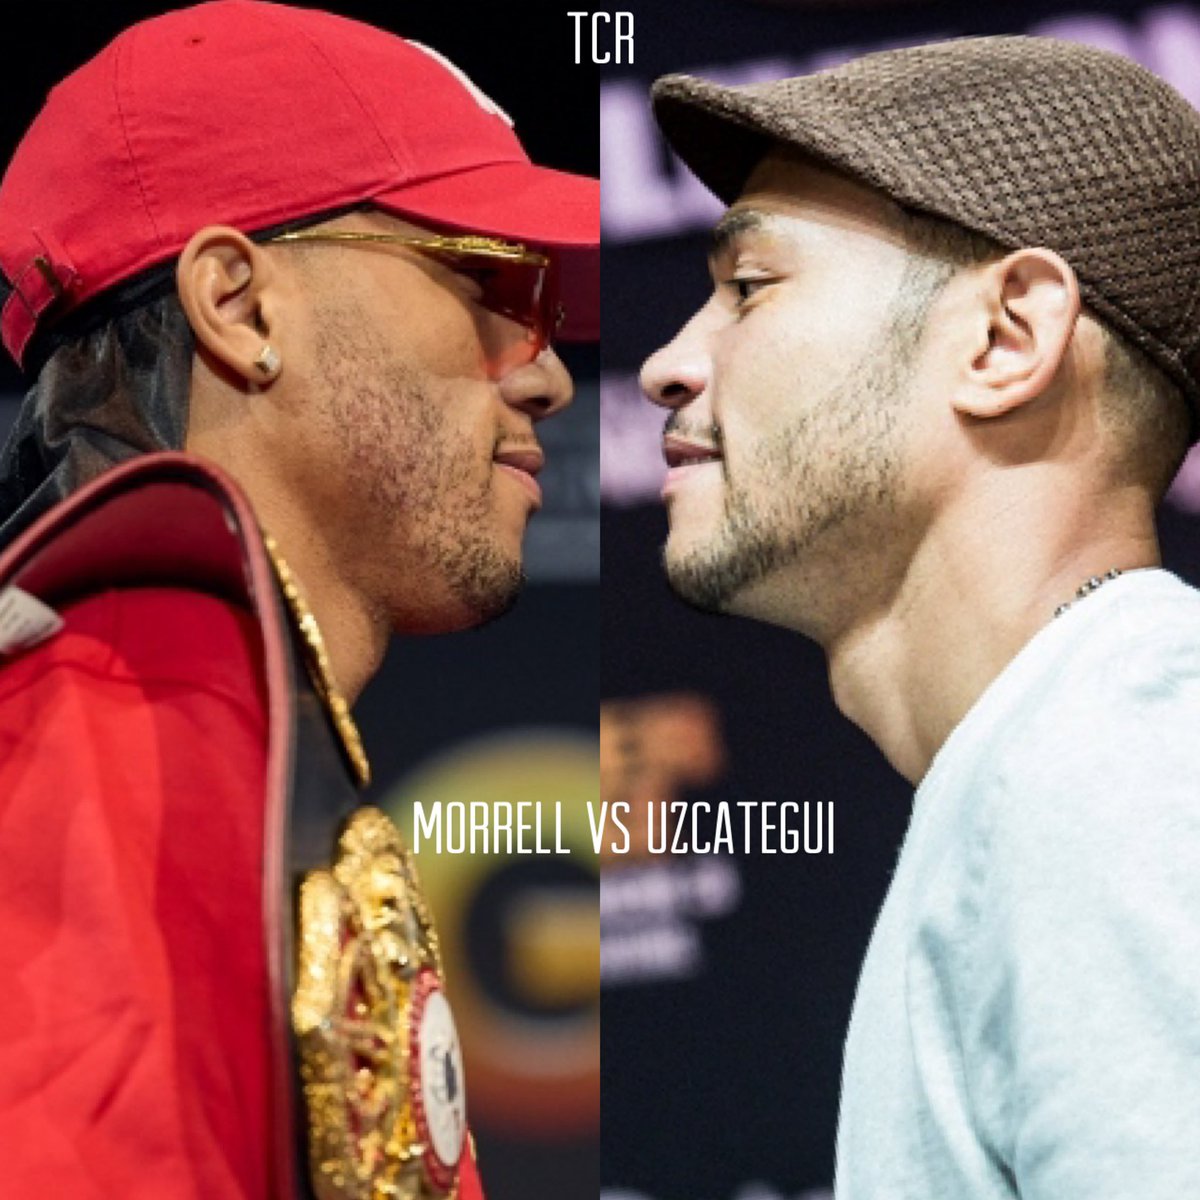 PBC & Showtime Should Make David Morrell vs Jose Uzcategui June Or July 2023. David Morrell Can Still Fight David Benavidez In October Or November This Year Too. 3 Fights In 2023. If Tank Can Return In 3 Months. So Can Morrell, Who Is Younger Than Him. #MorrellUzcategui